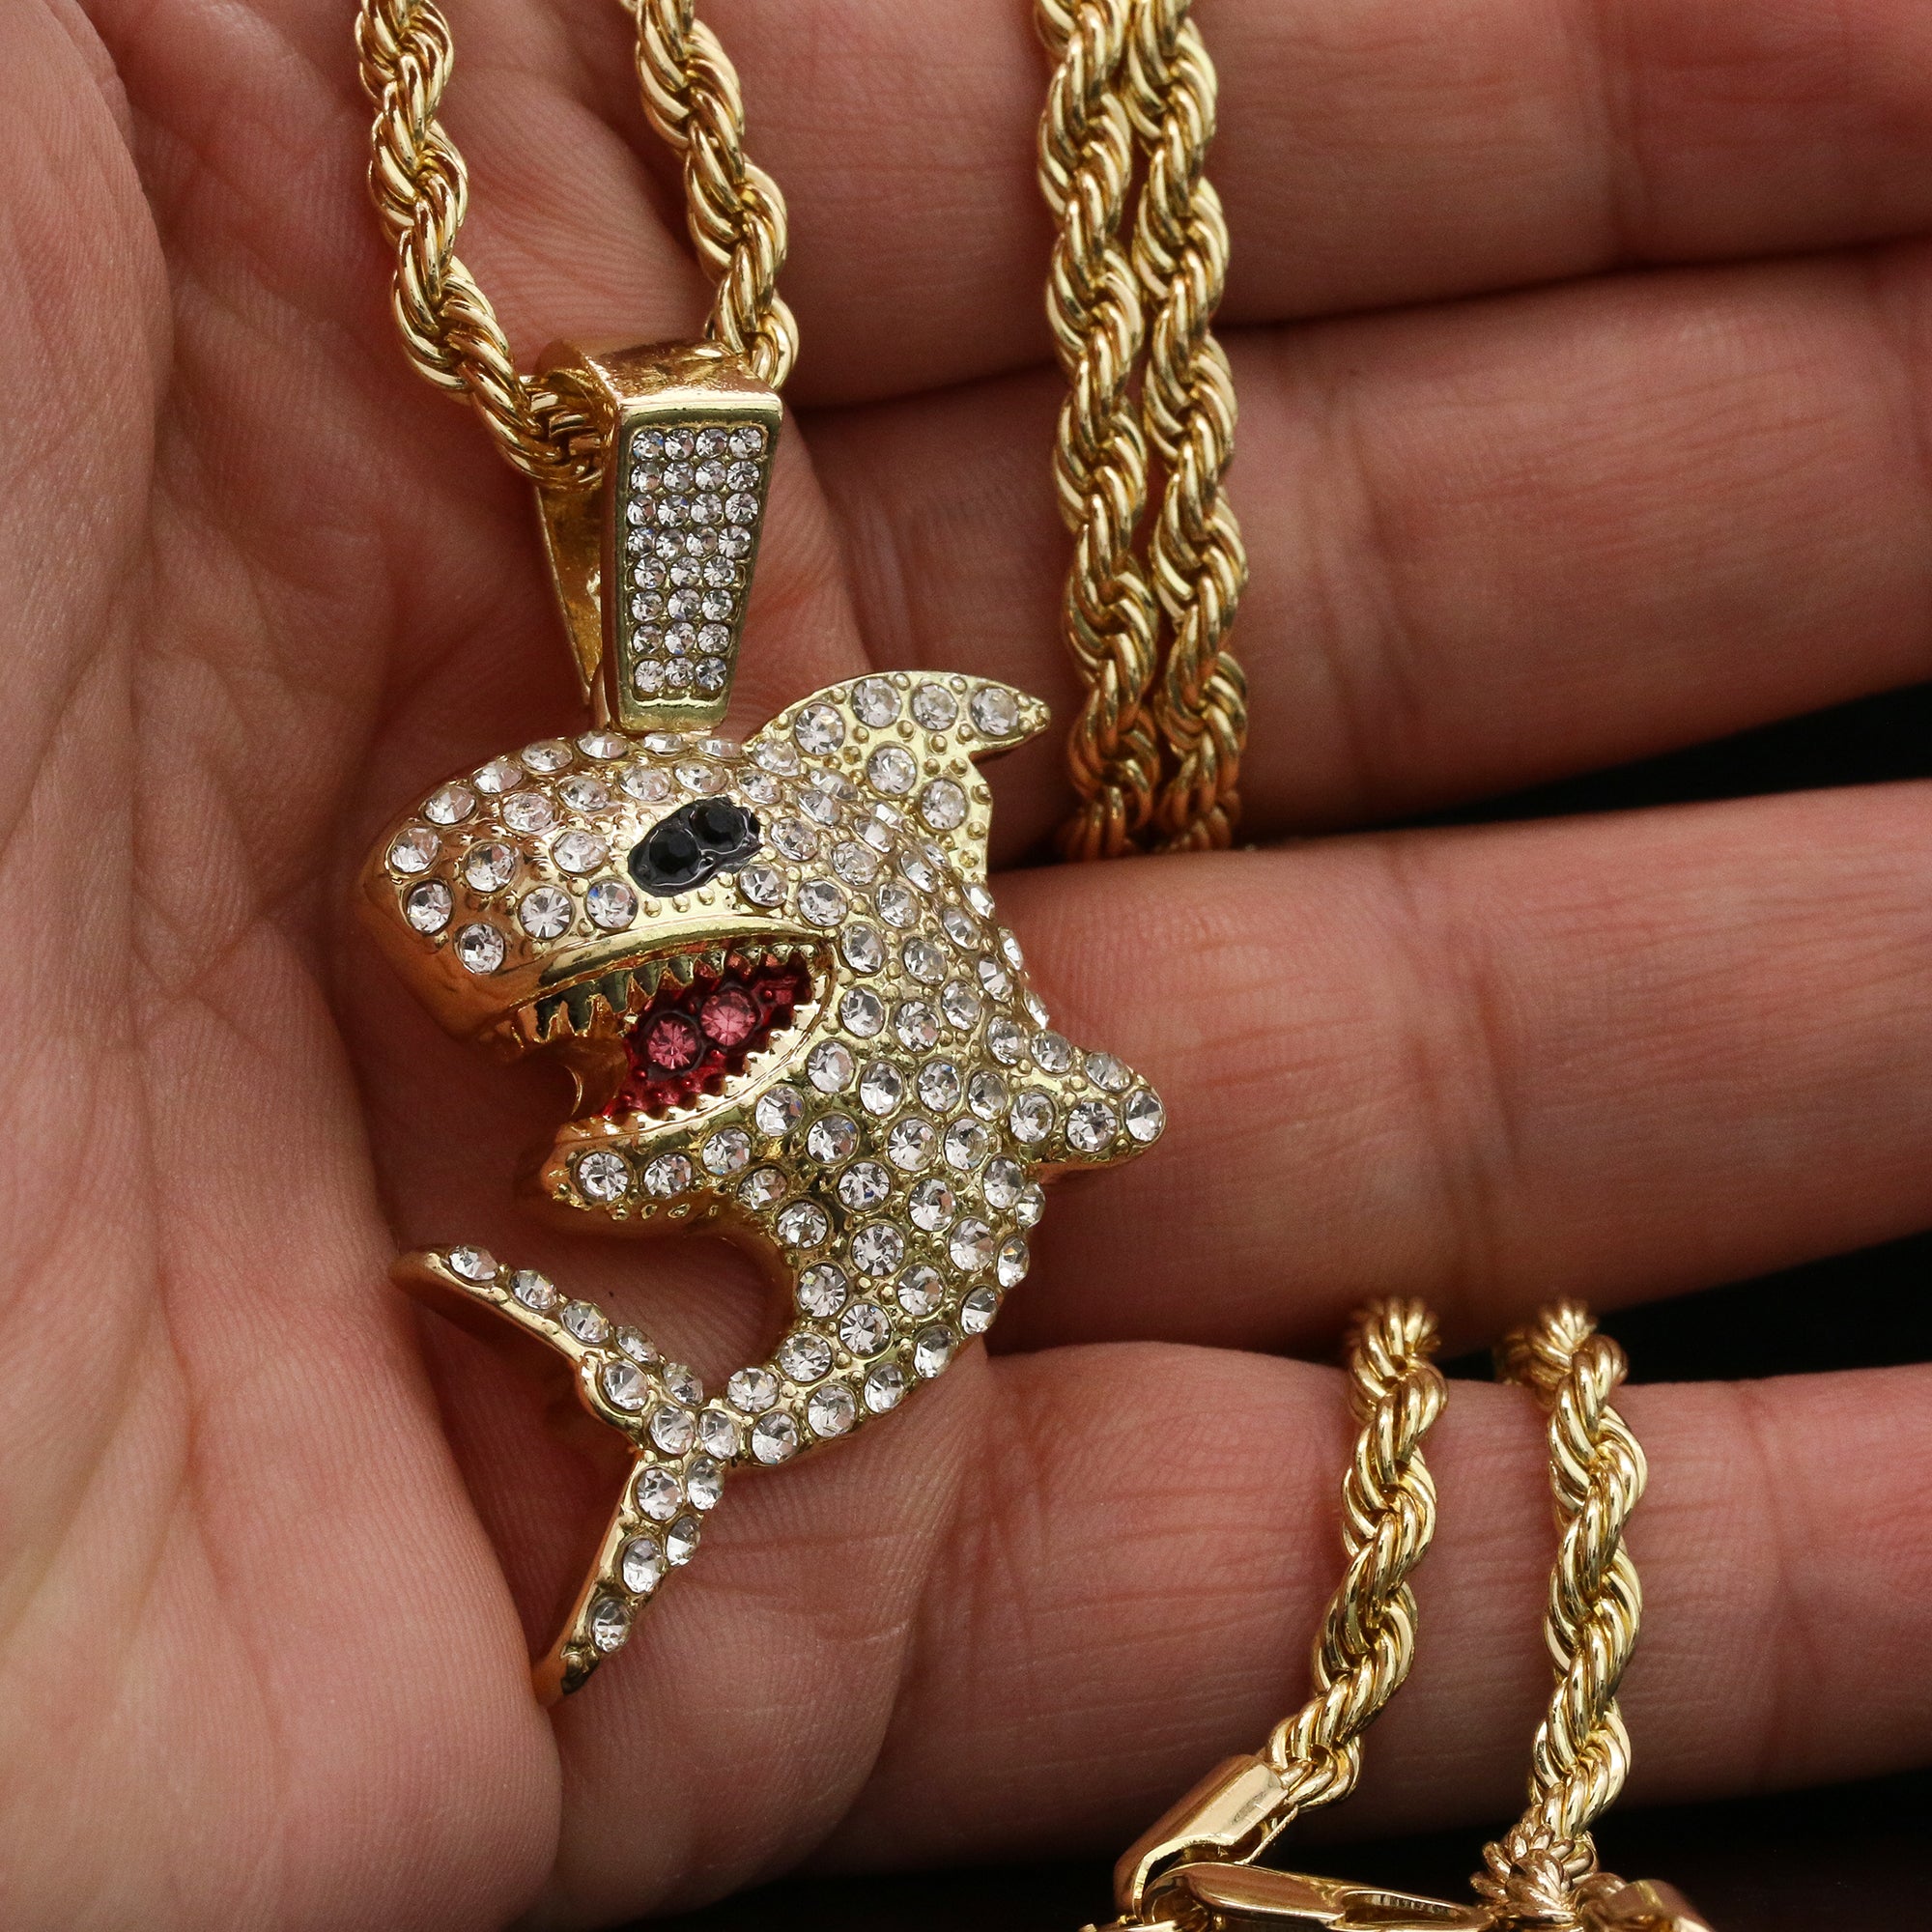 Shark Flooded Pendant Rope Necklace Chain Men's Gold Hip Hop 18k Cz Jewelry